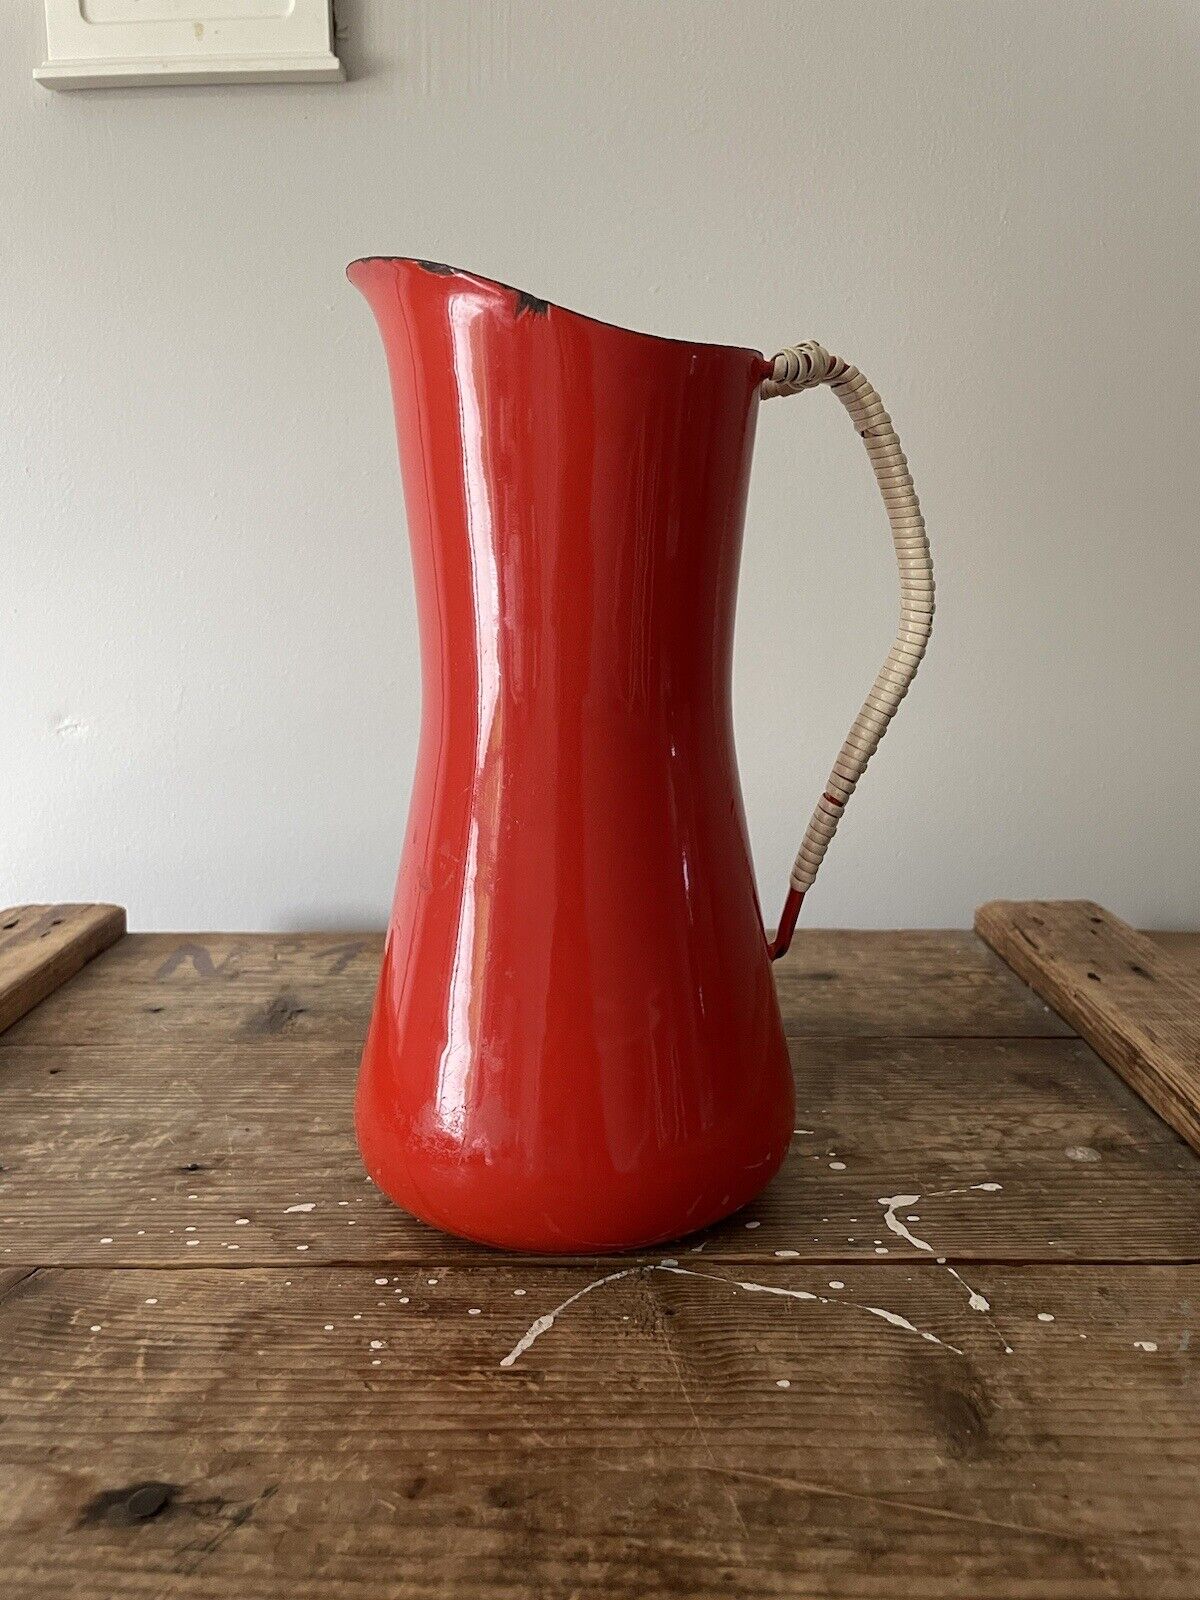 1950s Red Dansk Kobenstyle Wrapped Handle Pitcher by Jens Quistgaard